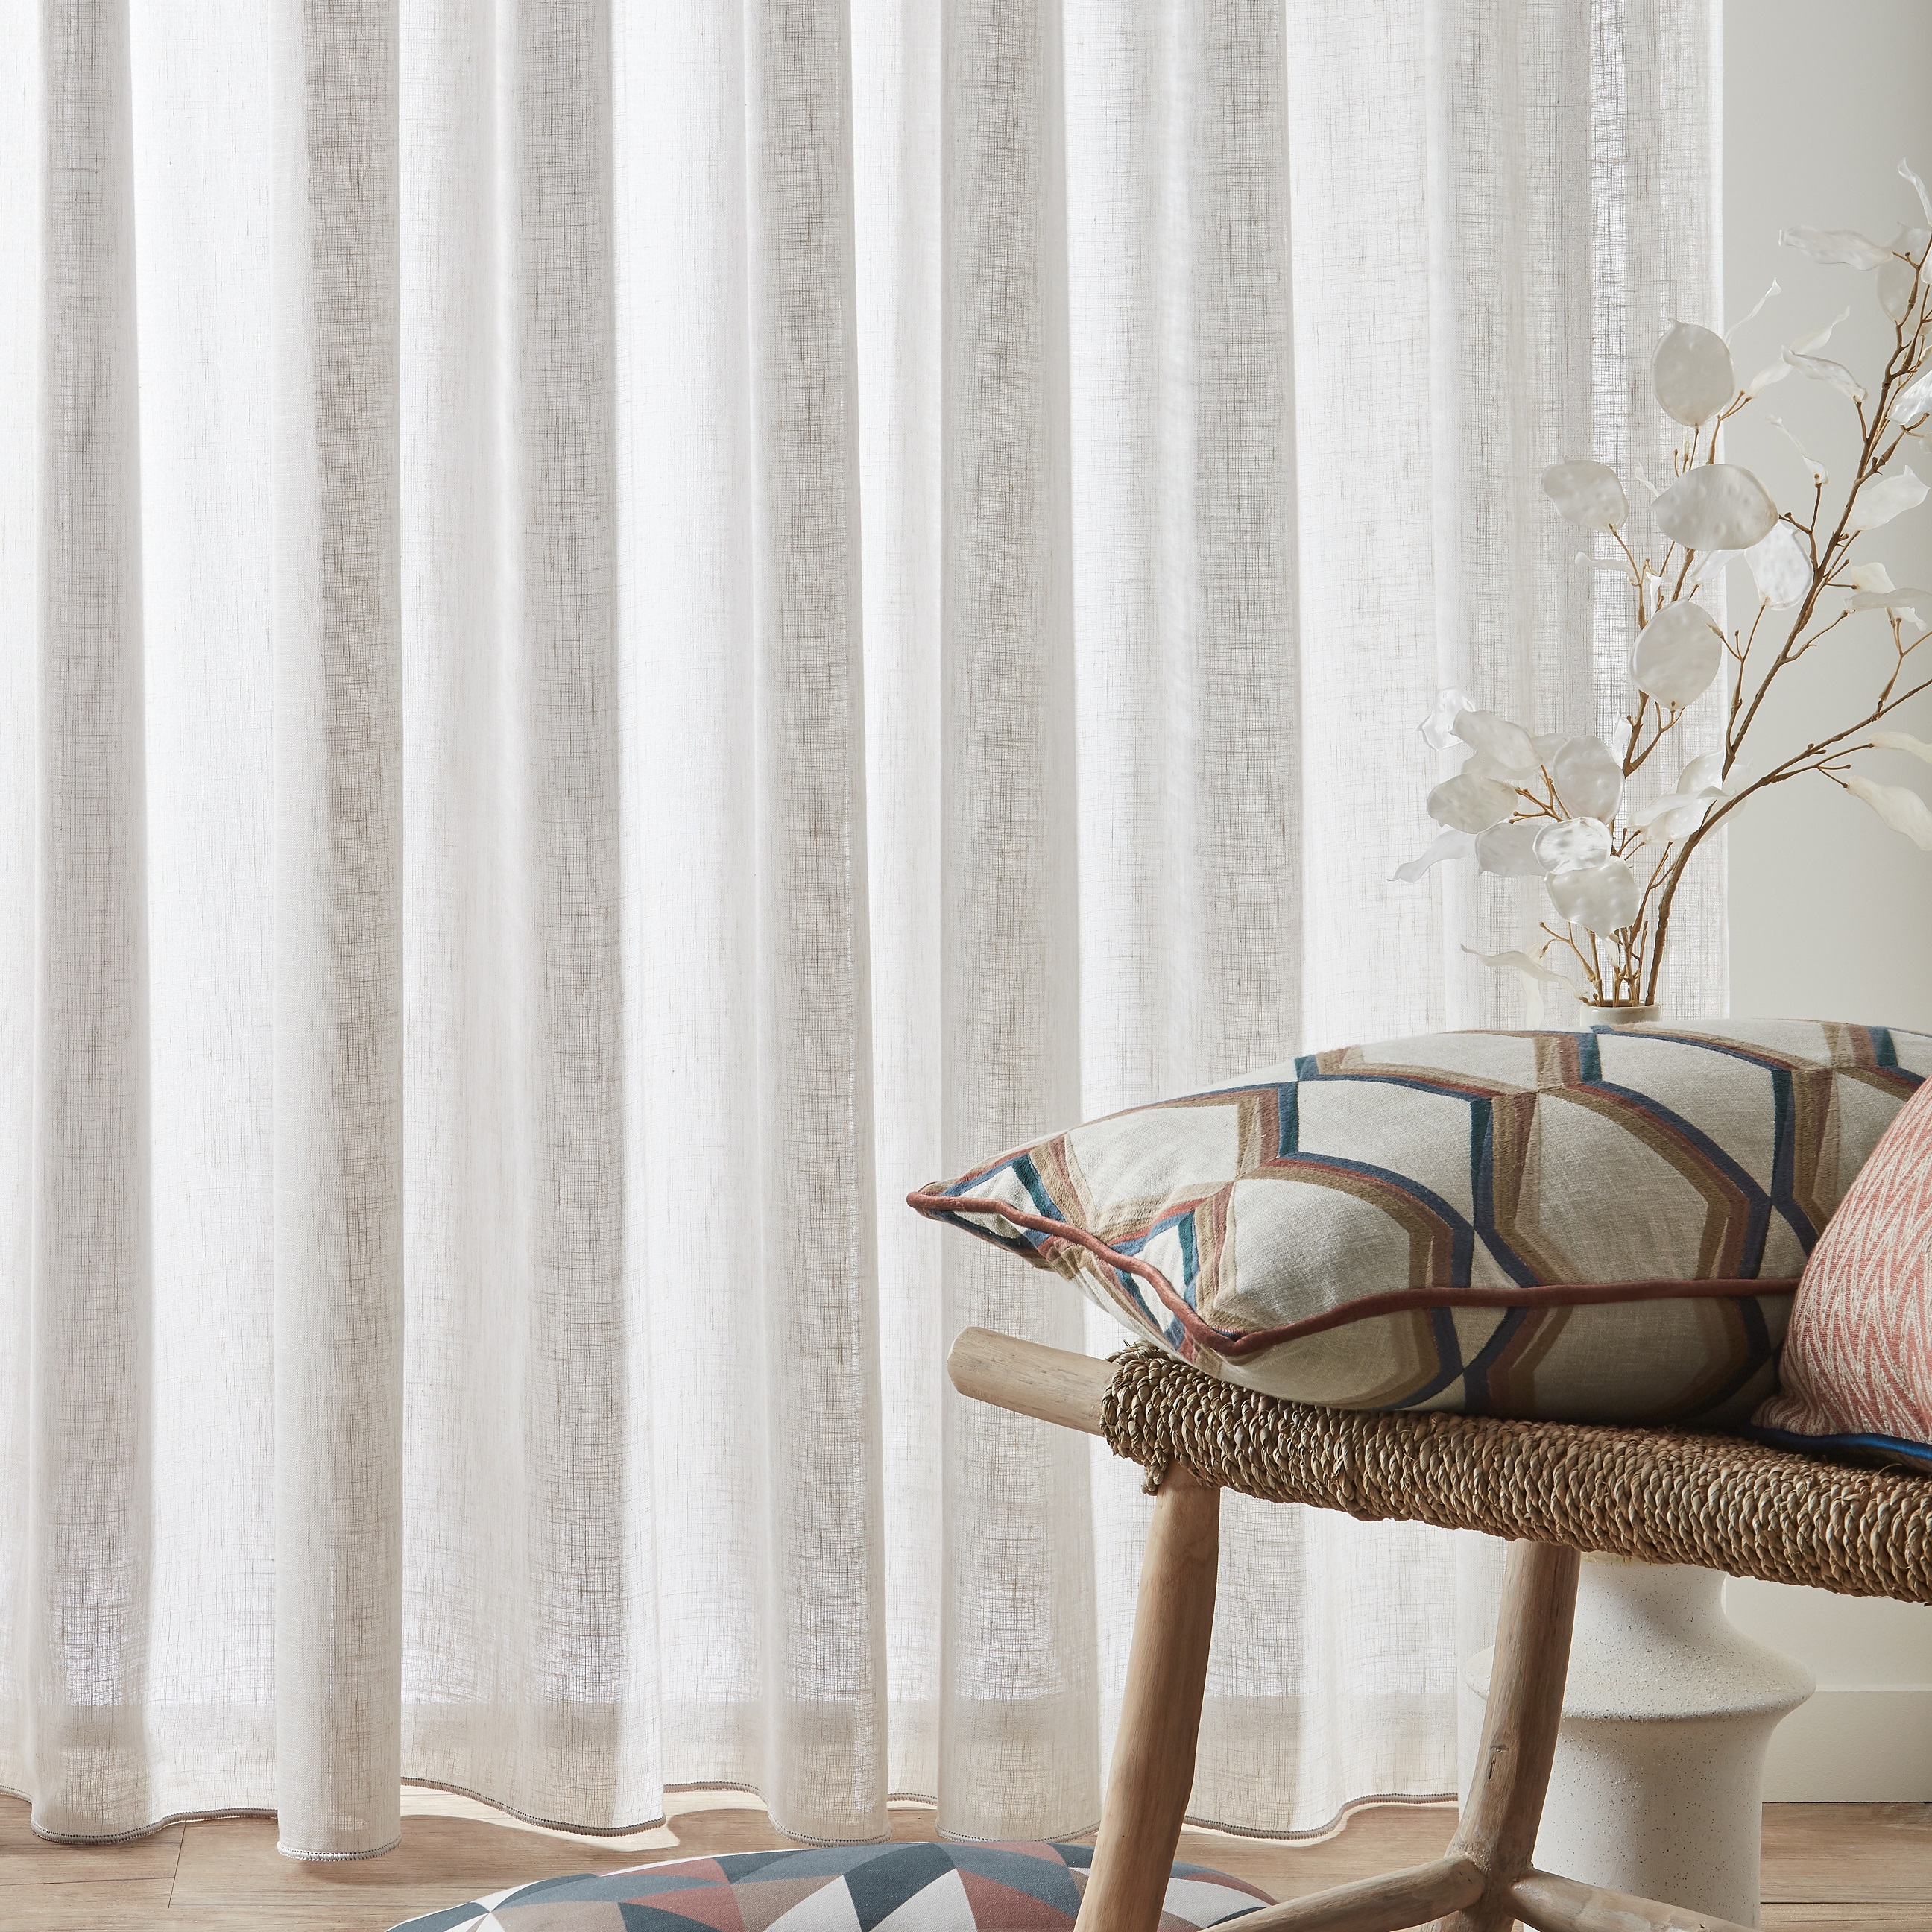 5 Tips To Keep House Cool with Curtains & Blinds